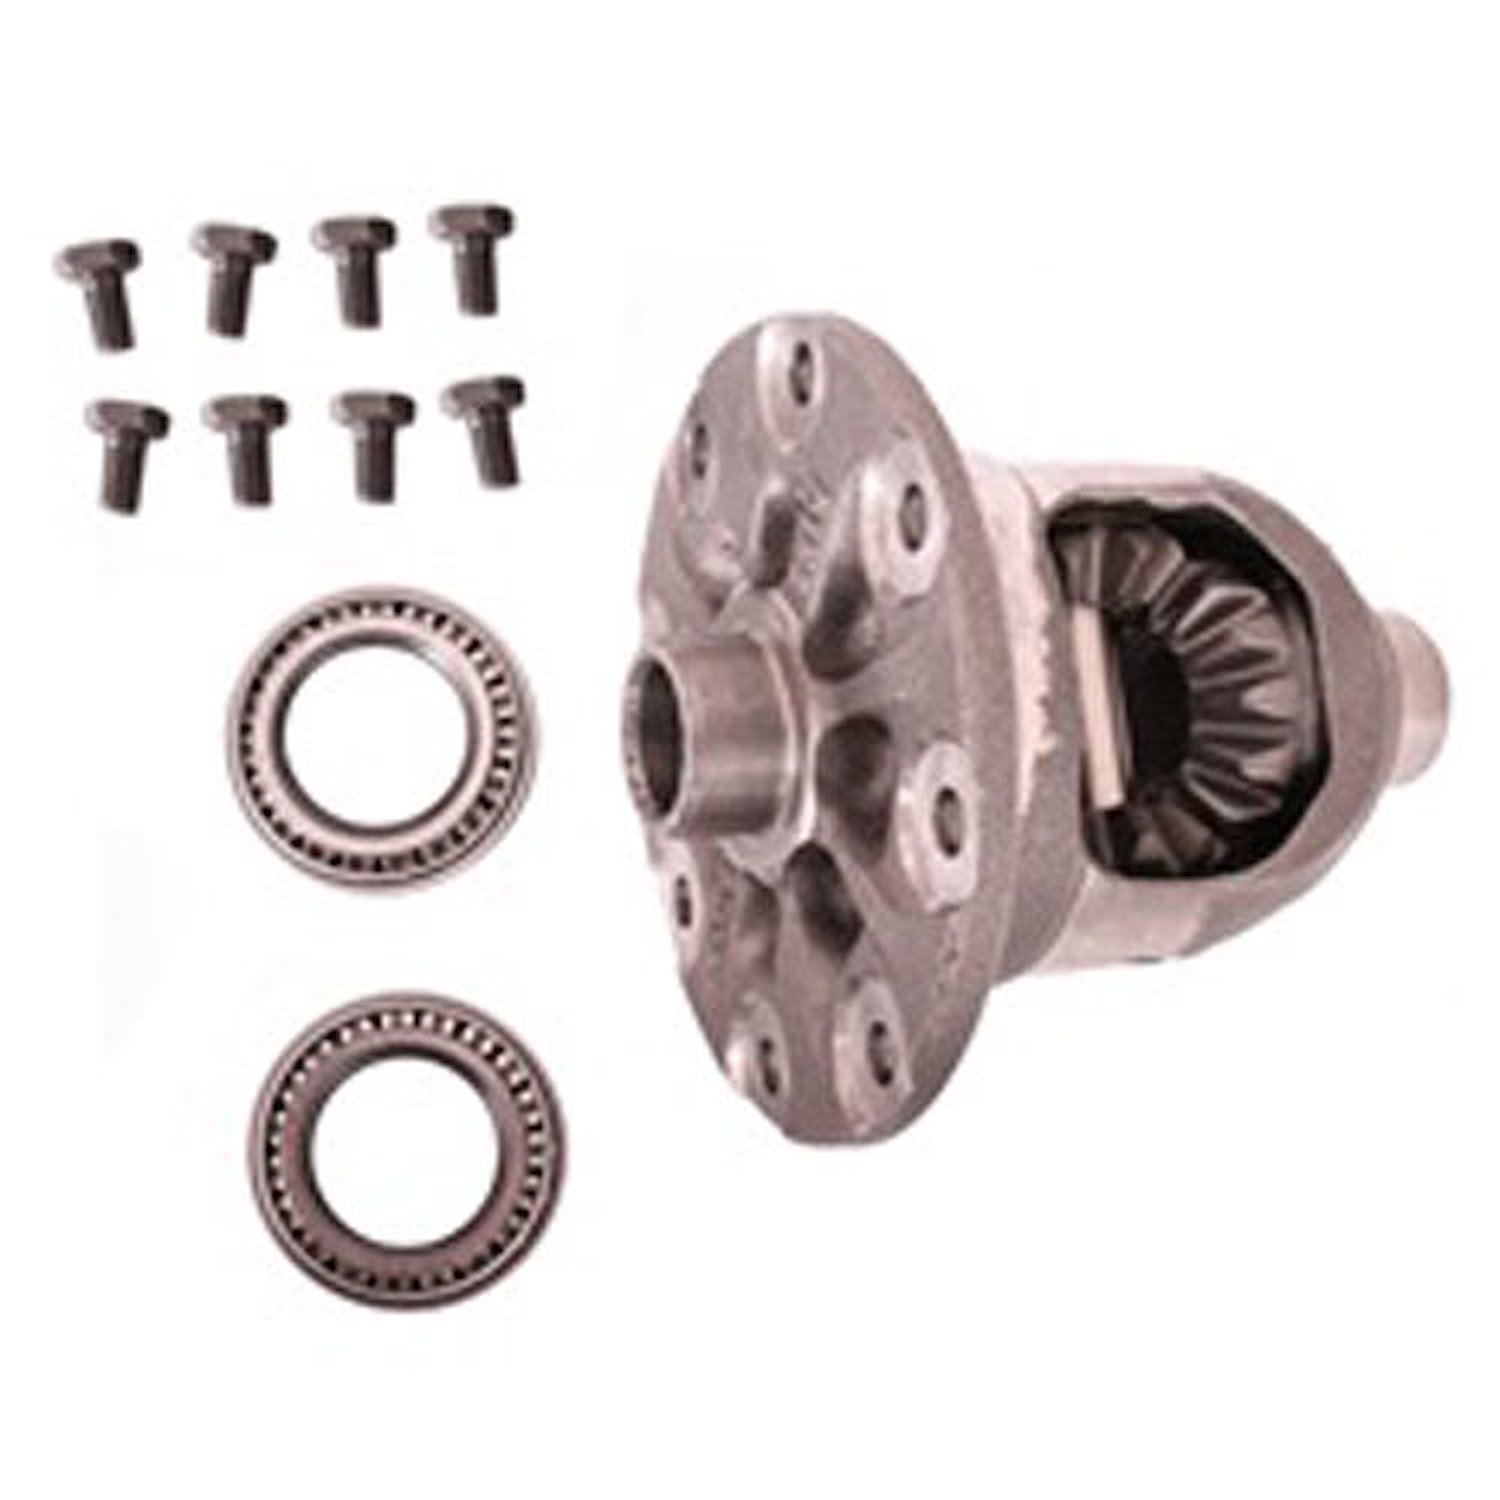 This Tru-Lok differential carrier assembly from Omix-ADA fits